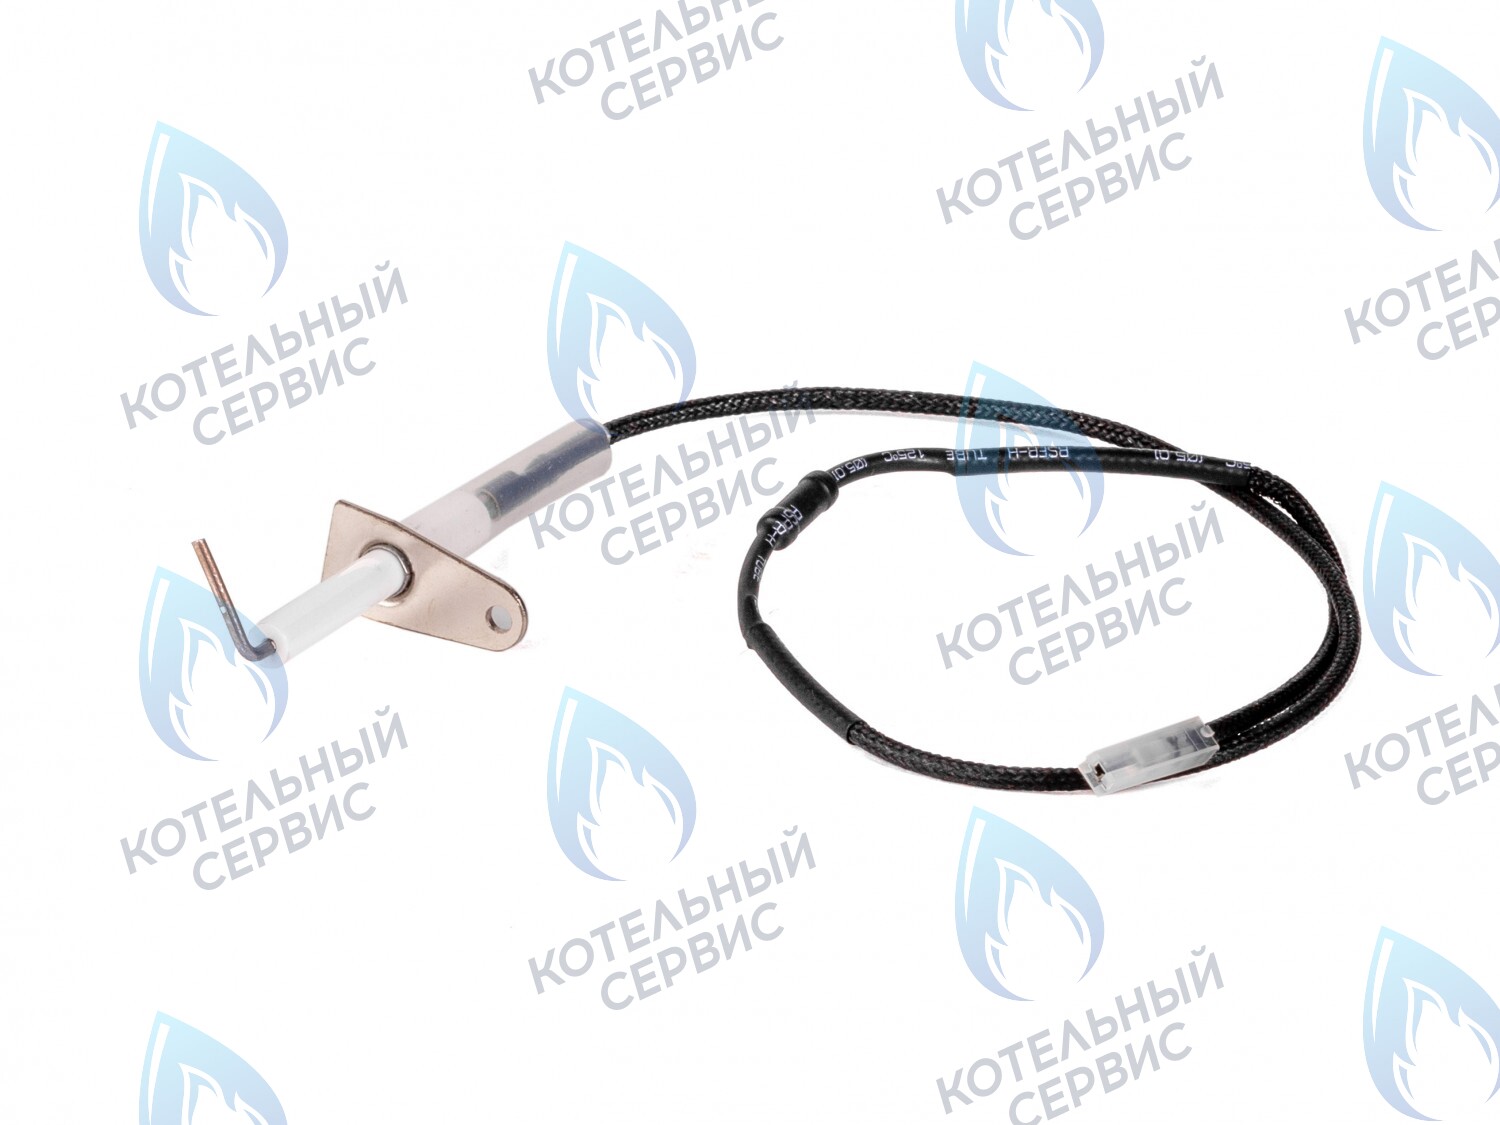 IE010 Электрод розжига и ионизации HAIER F21S(T), F21(T) (F01101, 0530002946), L1P18-F21(M)HEC (F01305, 0530016114) в Оренбурге	